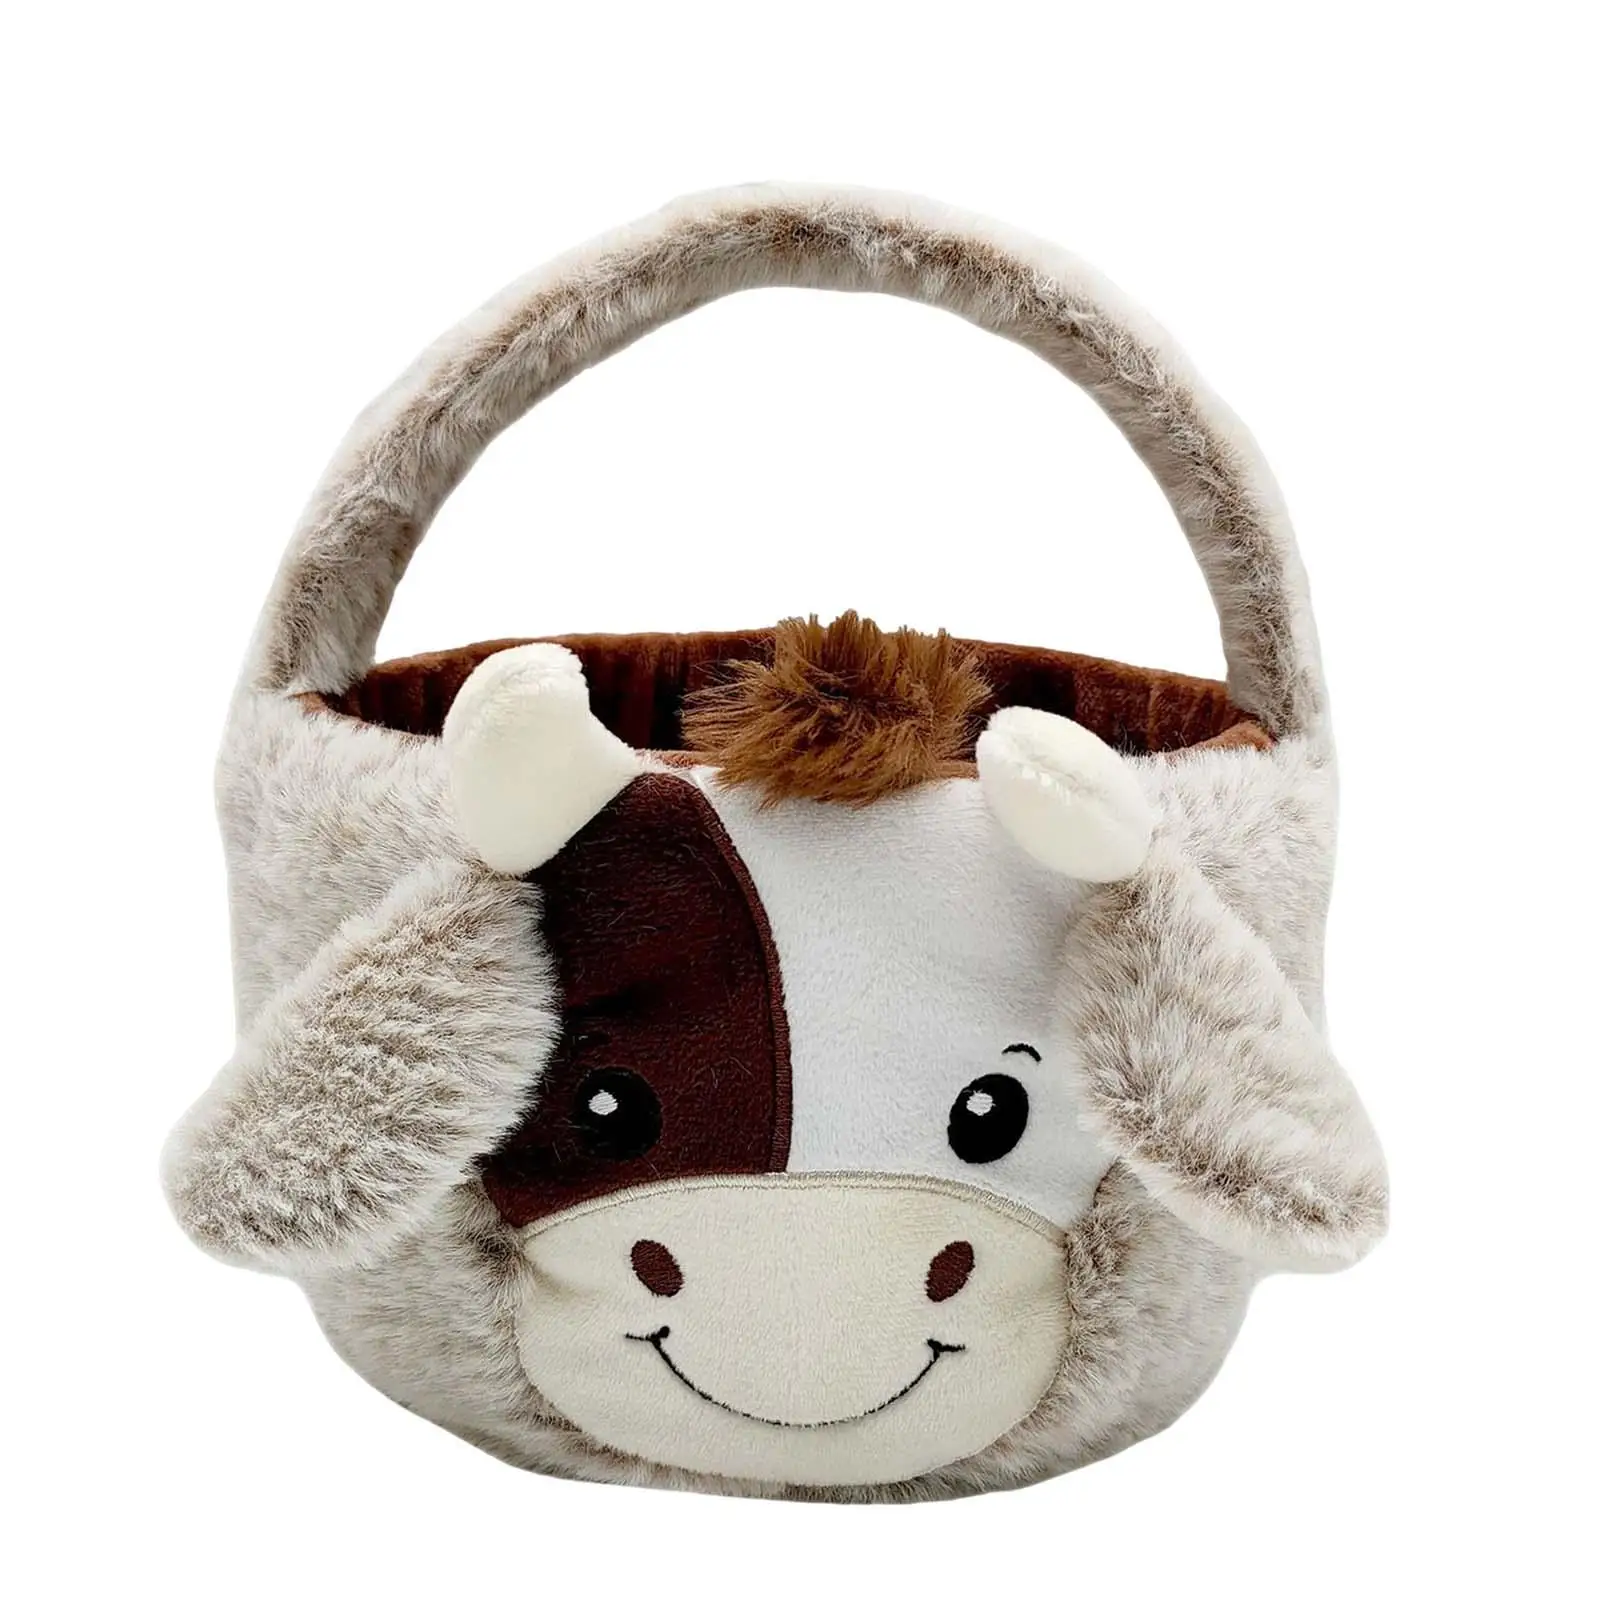 Cute Plush Cow Easter Basket Easter Egg Finding Toys Storage Candy Gifts Bag Reusable for Spring Candies Birthday Decor Kids